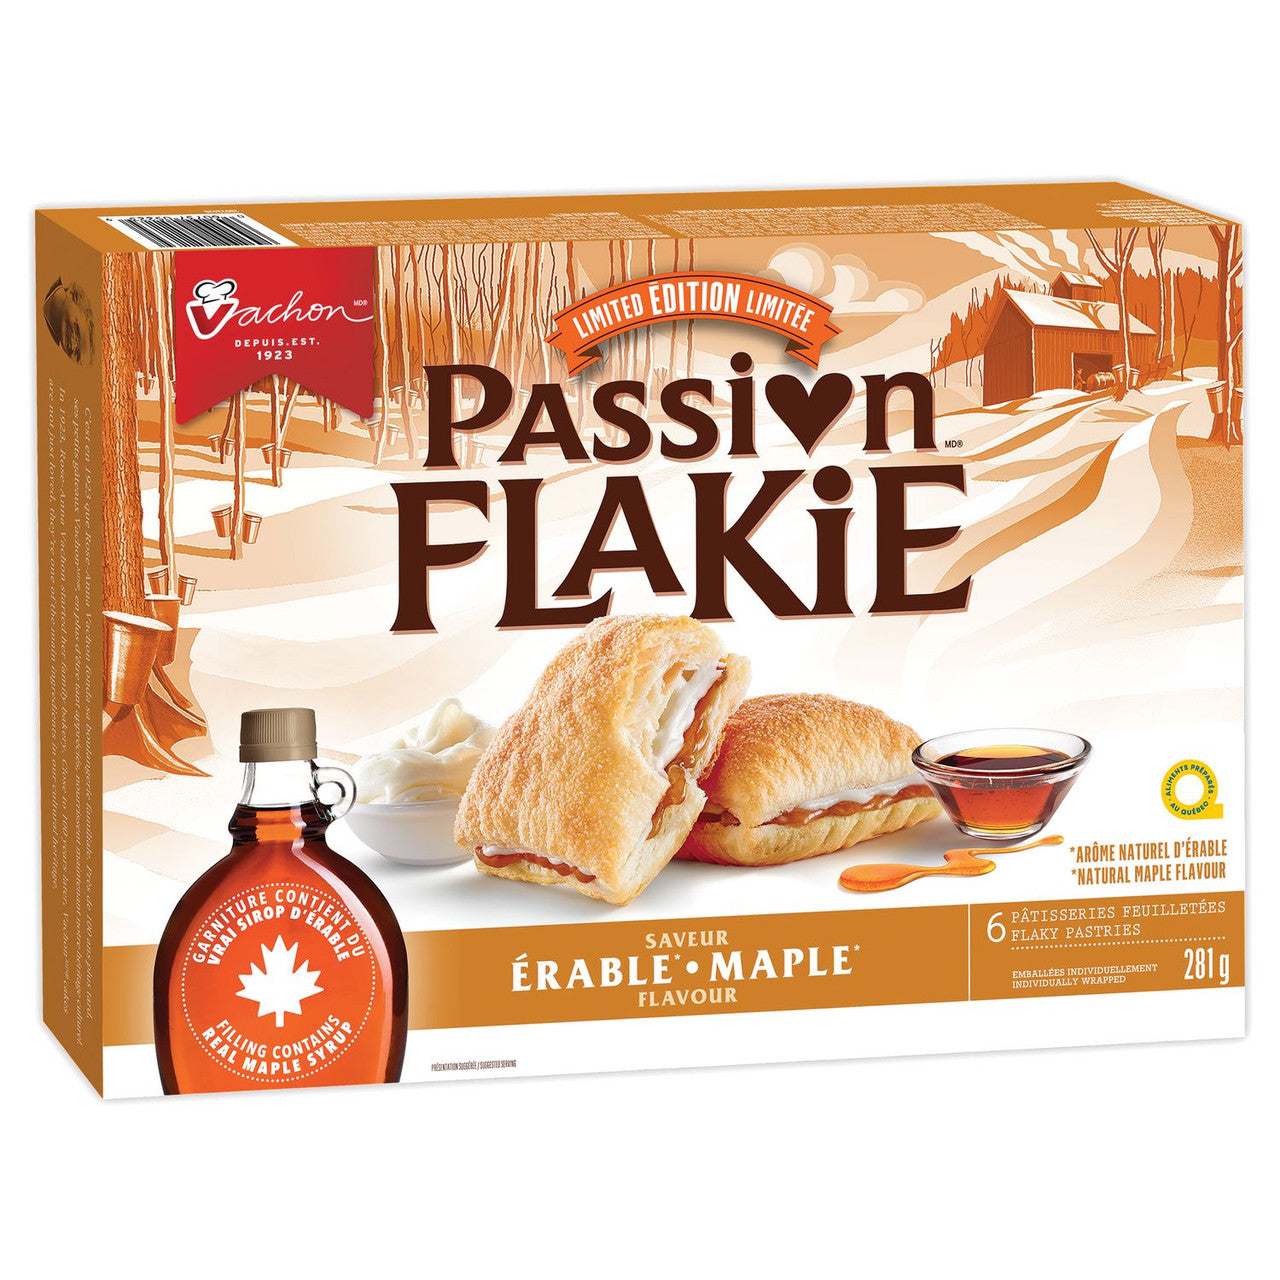 Vachon Passion Flakie Maple Flavor Cake, 281g/9 oz., {Imported from Canada}